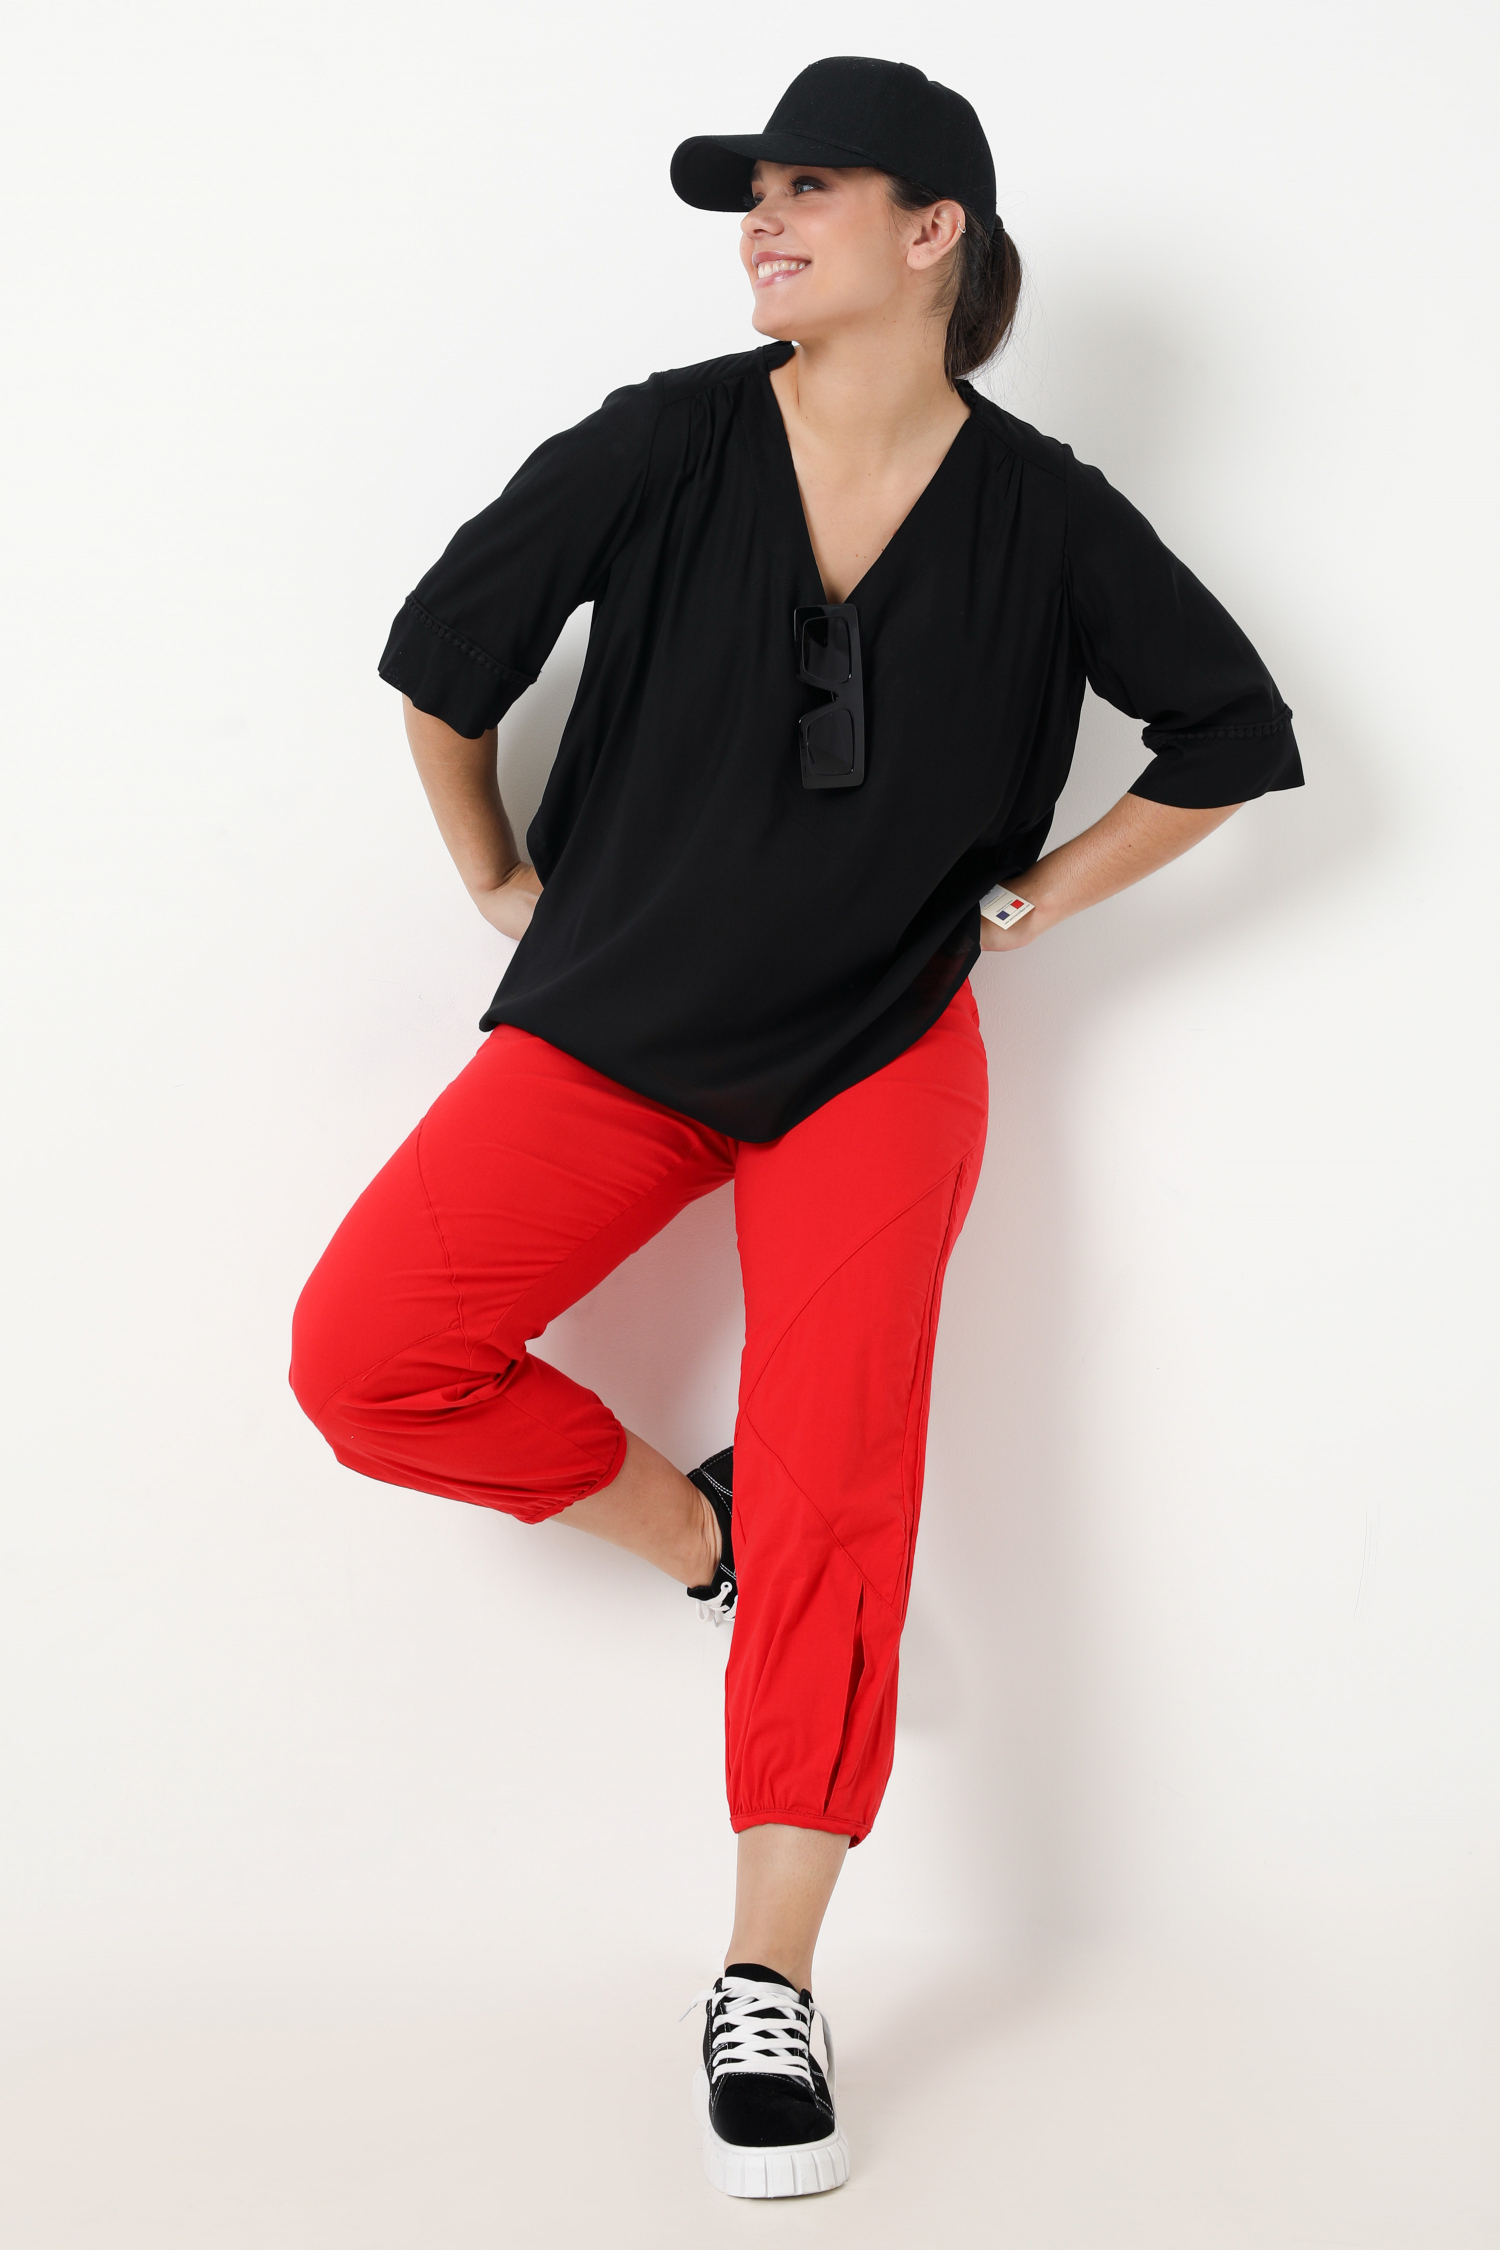 Plain V-neck blouse in eco-responsible material